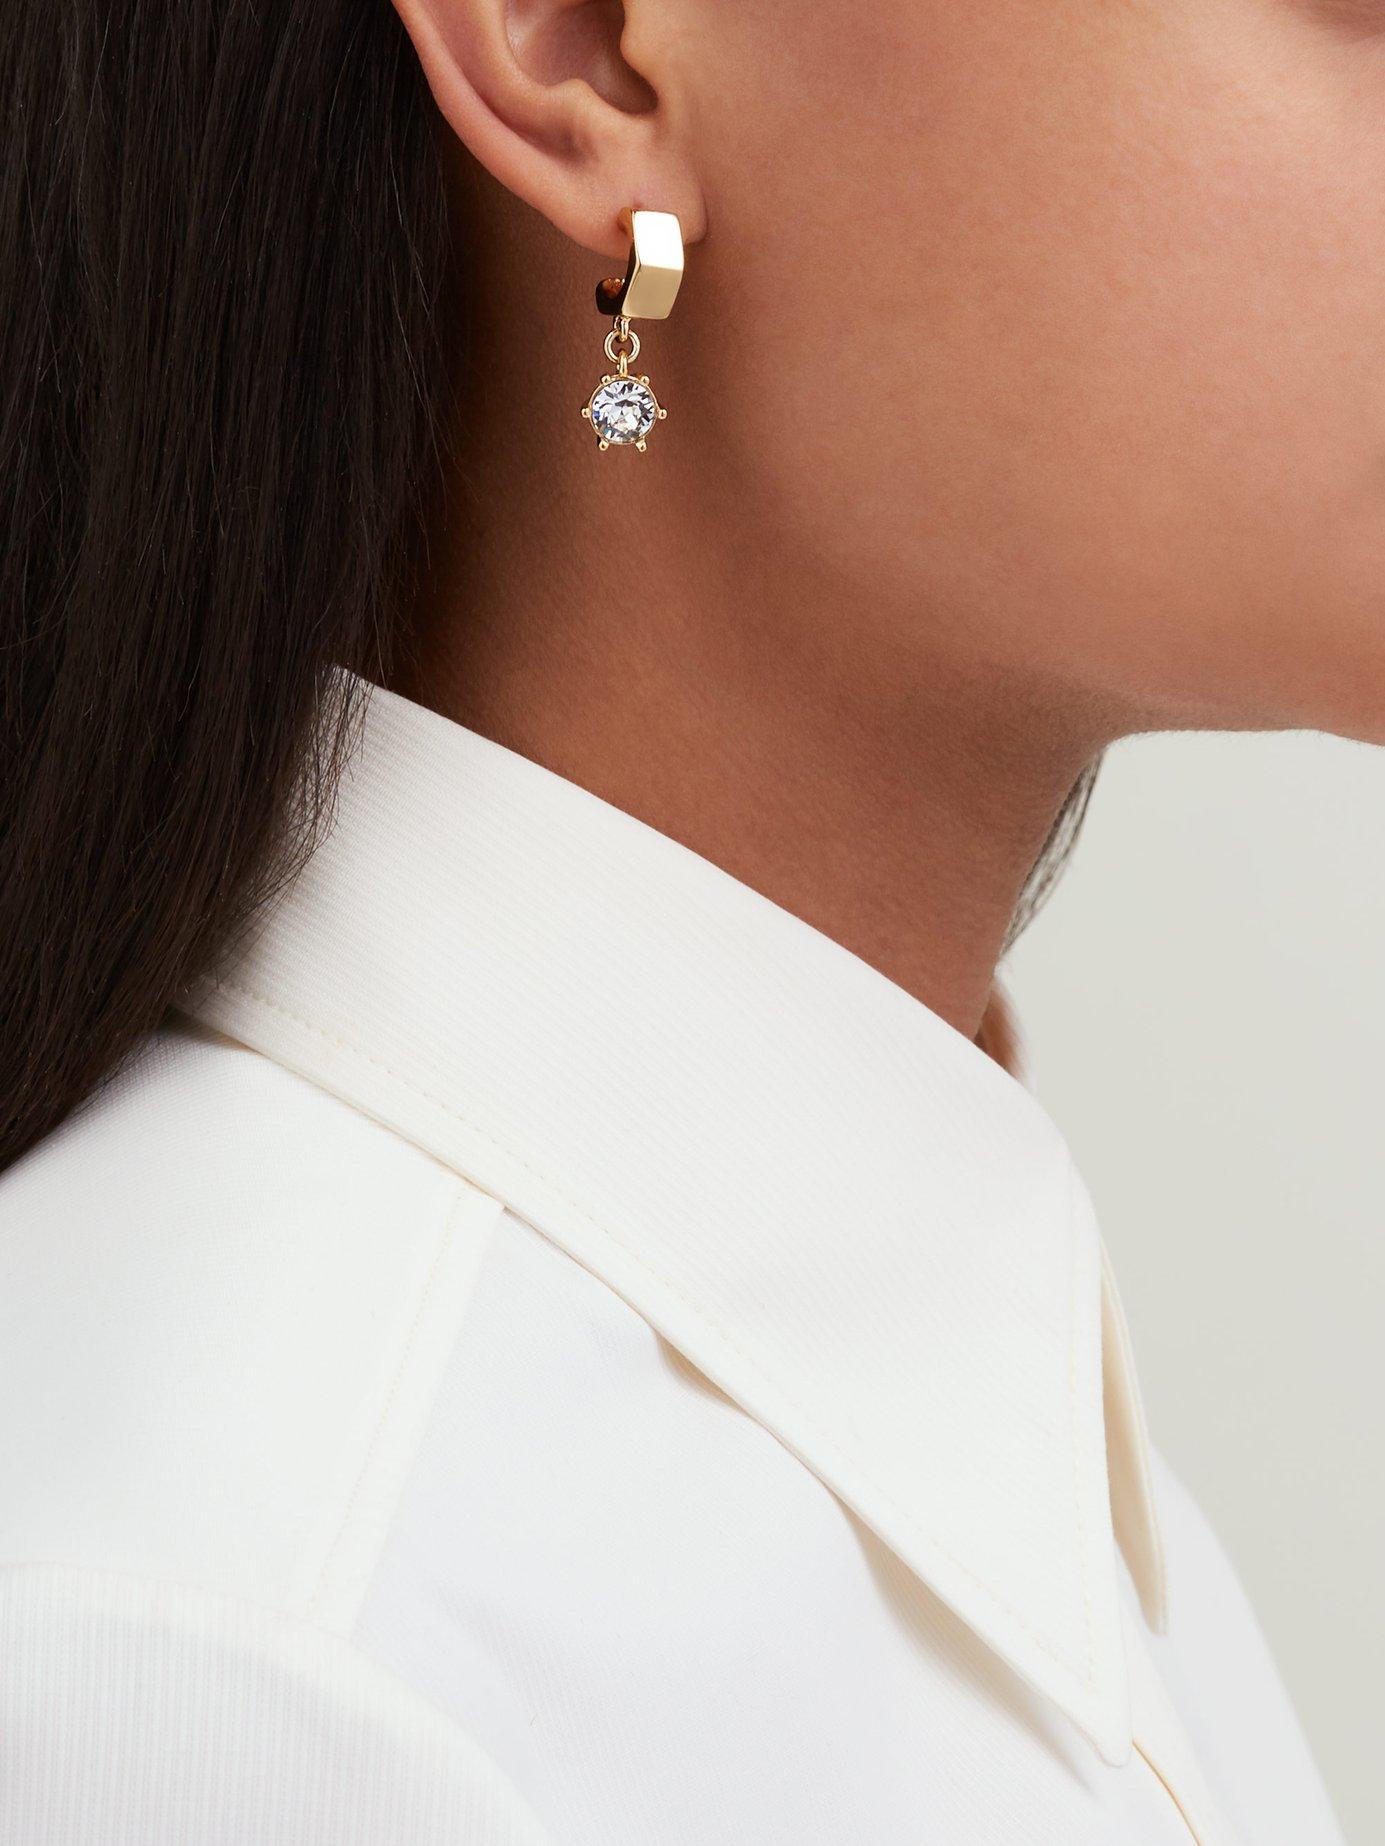 Burberry Nut And Bolt Earrings in Gold (Metallic) | Lyst